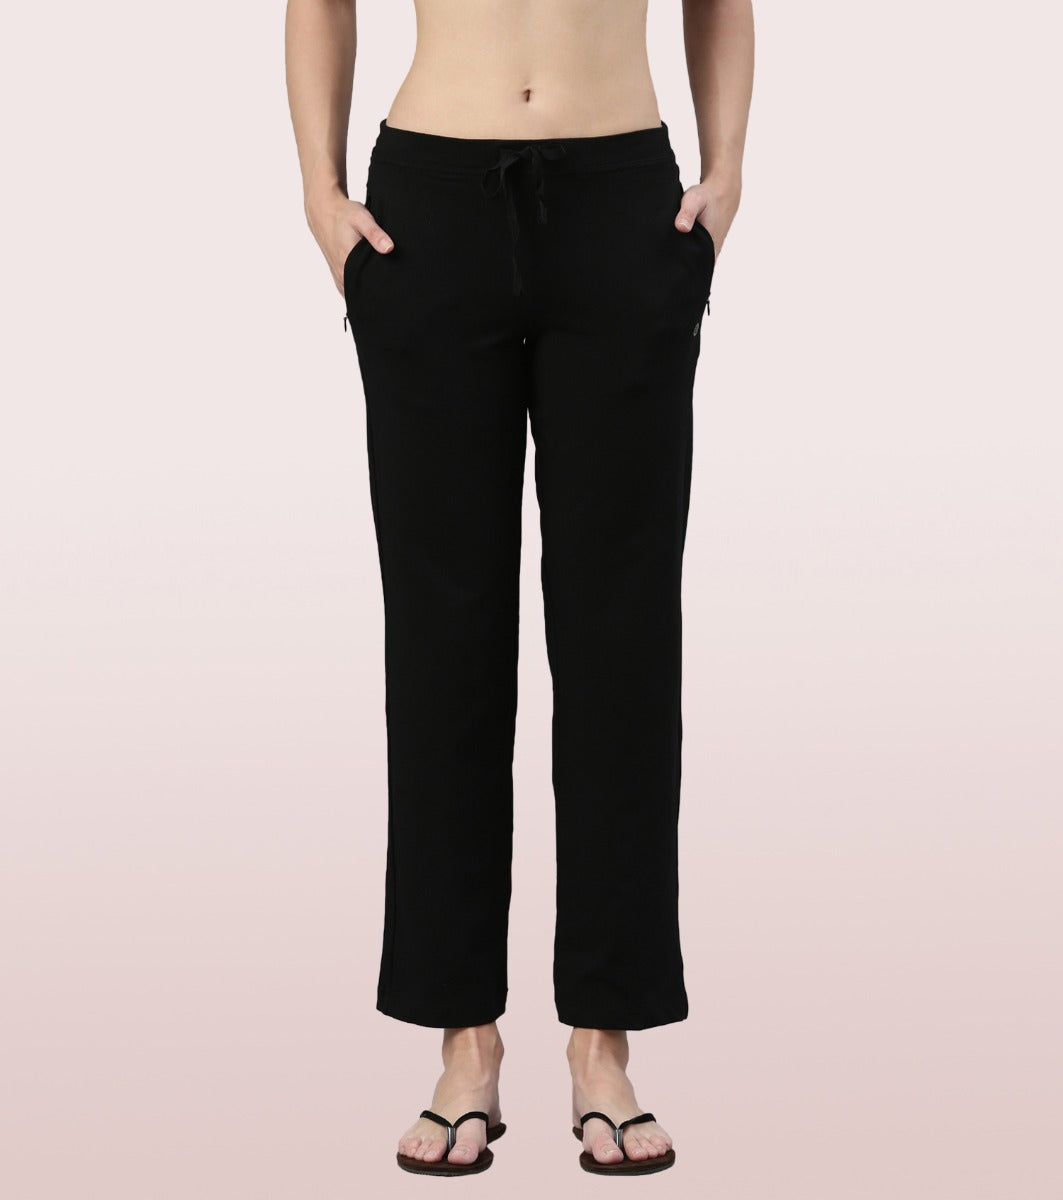 Enamor Track Pants in Hyderabad - Dealers, Manufacturers & Suppliers -  Justdial